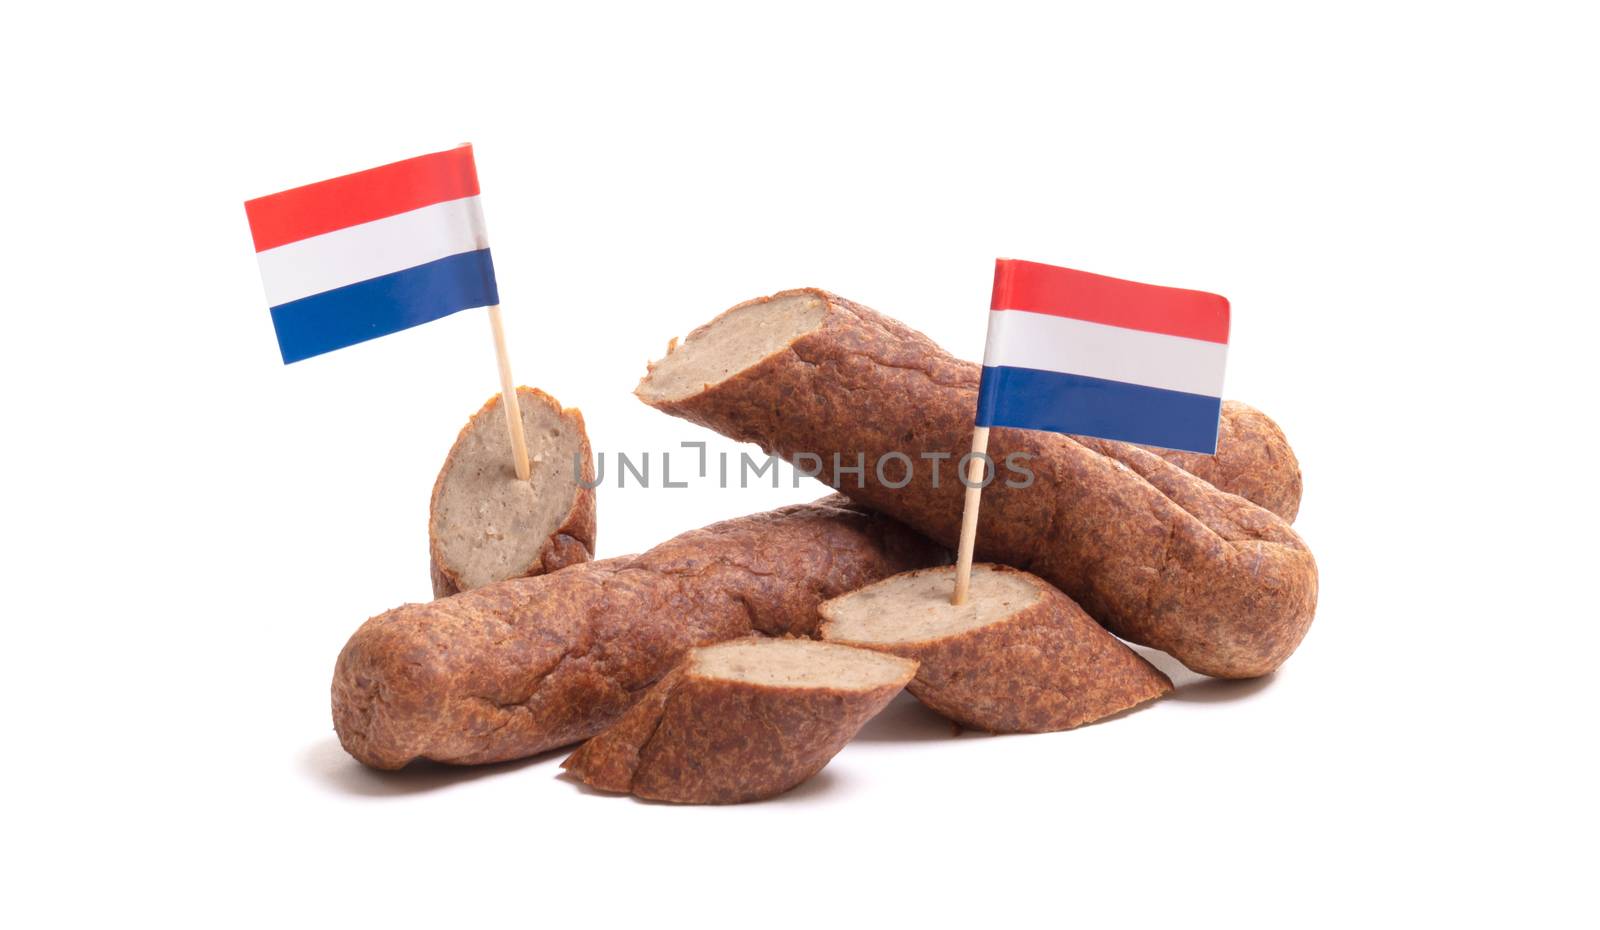 Chopped up frikadel, a Dutch fast food snack, isolated